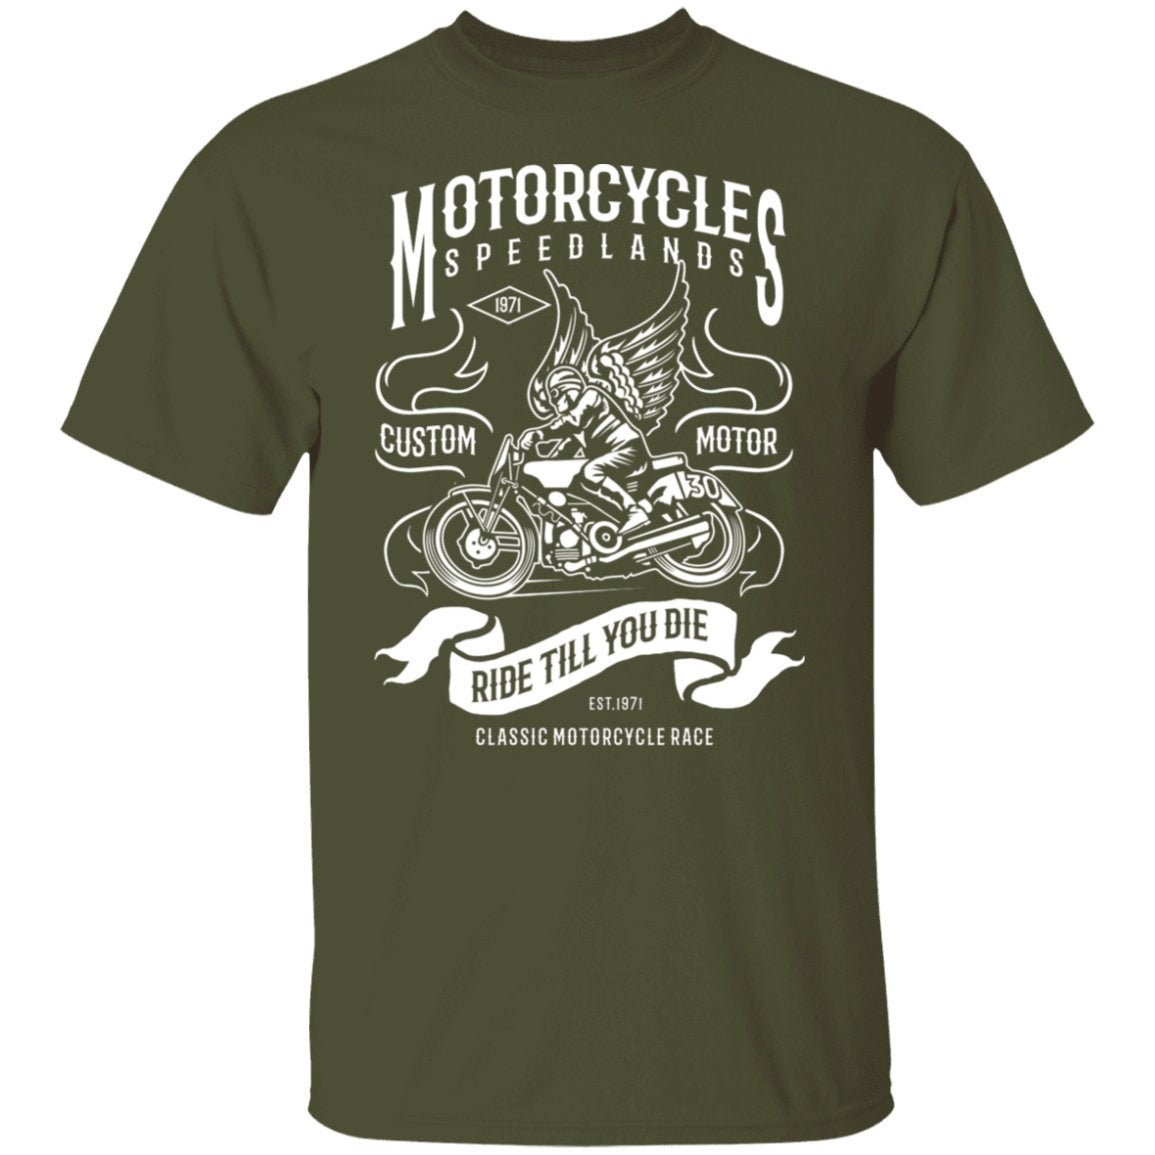 Motorcycle Shirt Motorcycle Speedlands Classic Motorcycle | Etsy